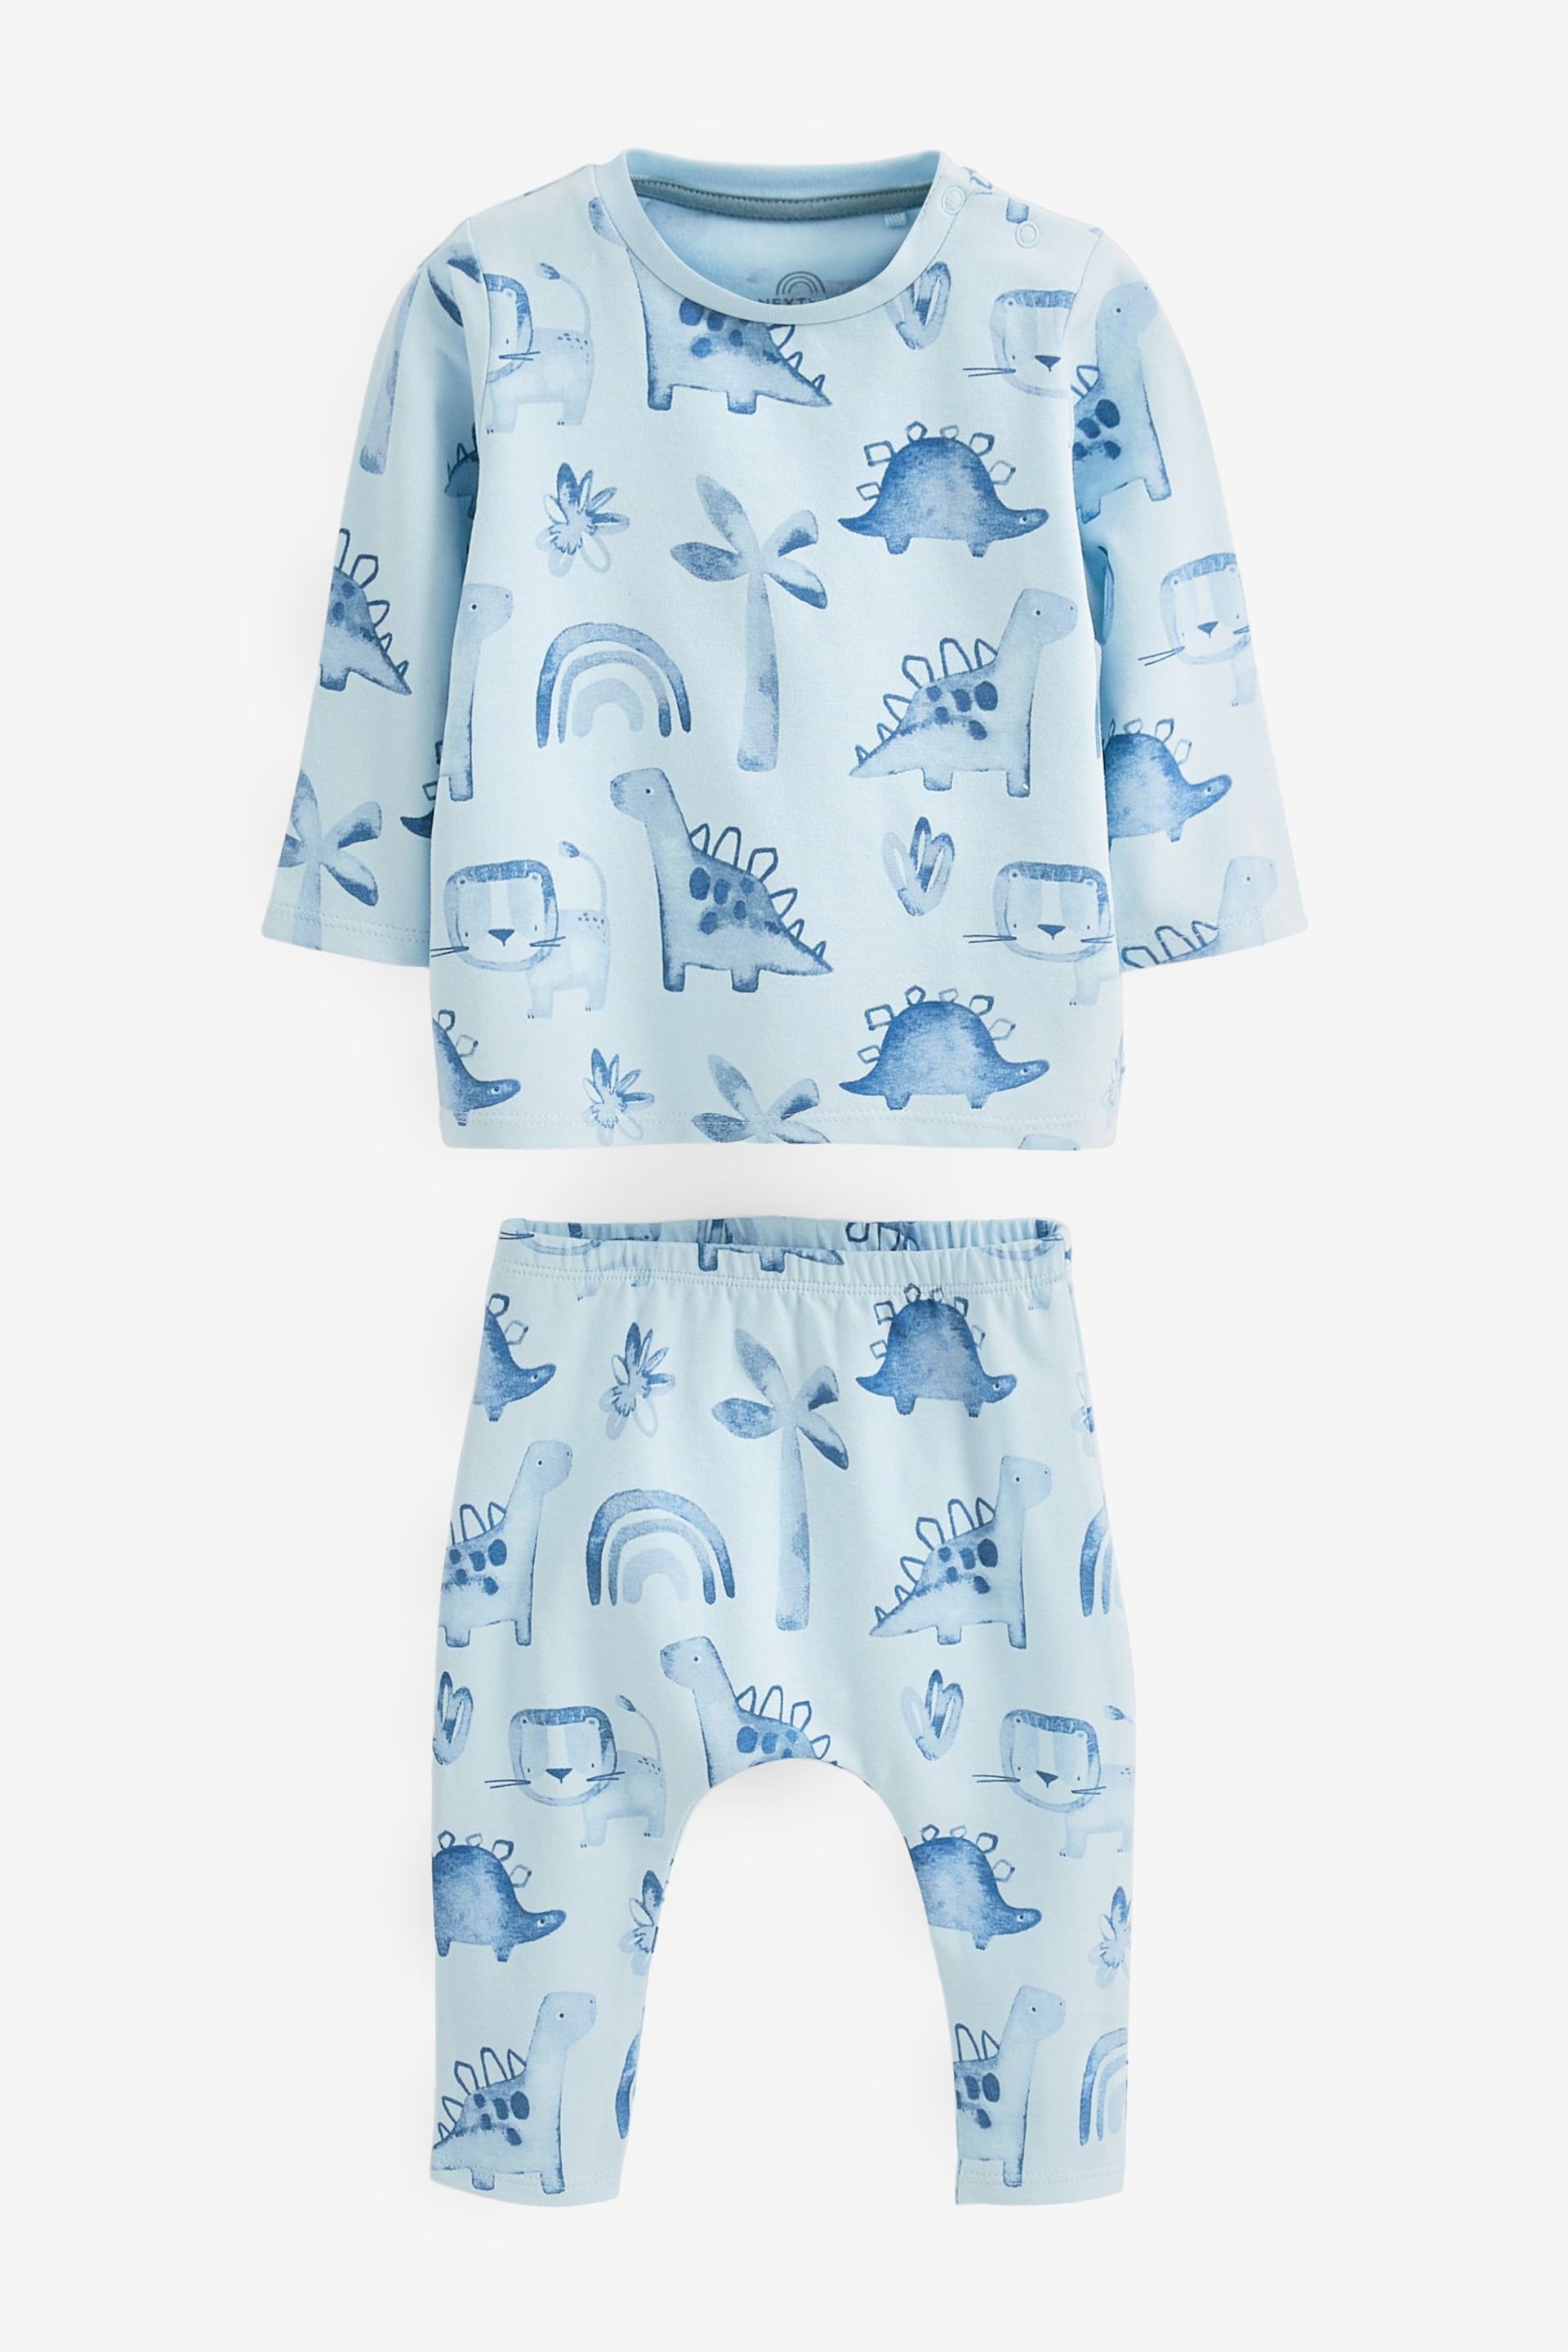 Blue dinosaur Baby T-Shirts And Leggings Set 6 Pack - Image 4 of 5